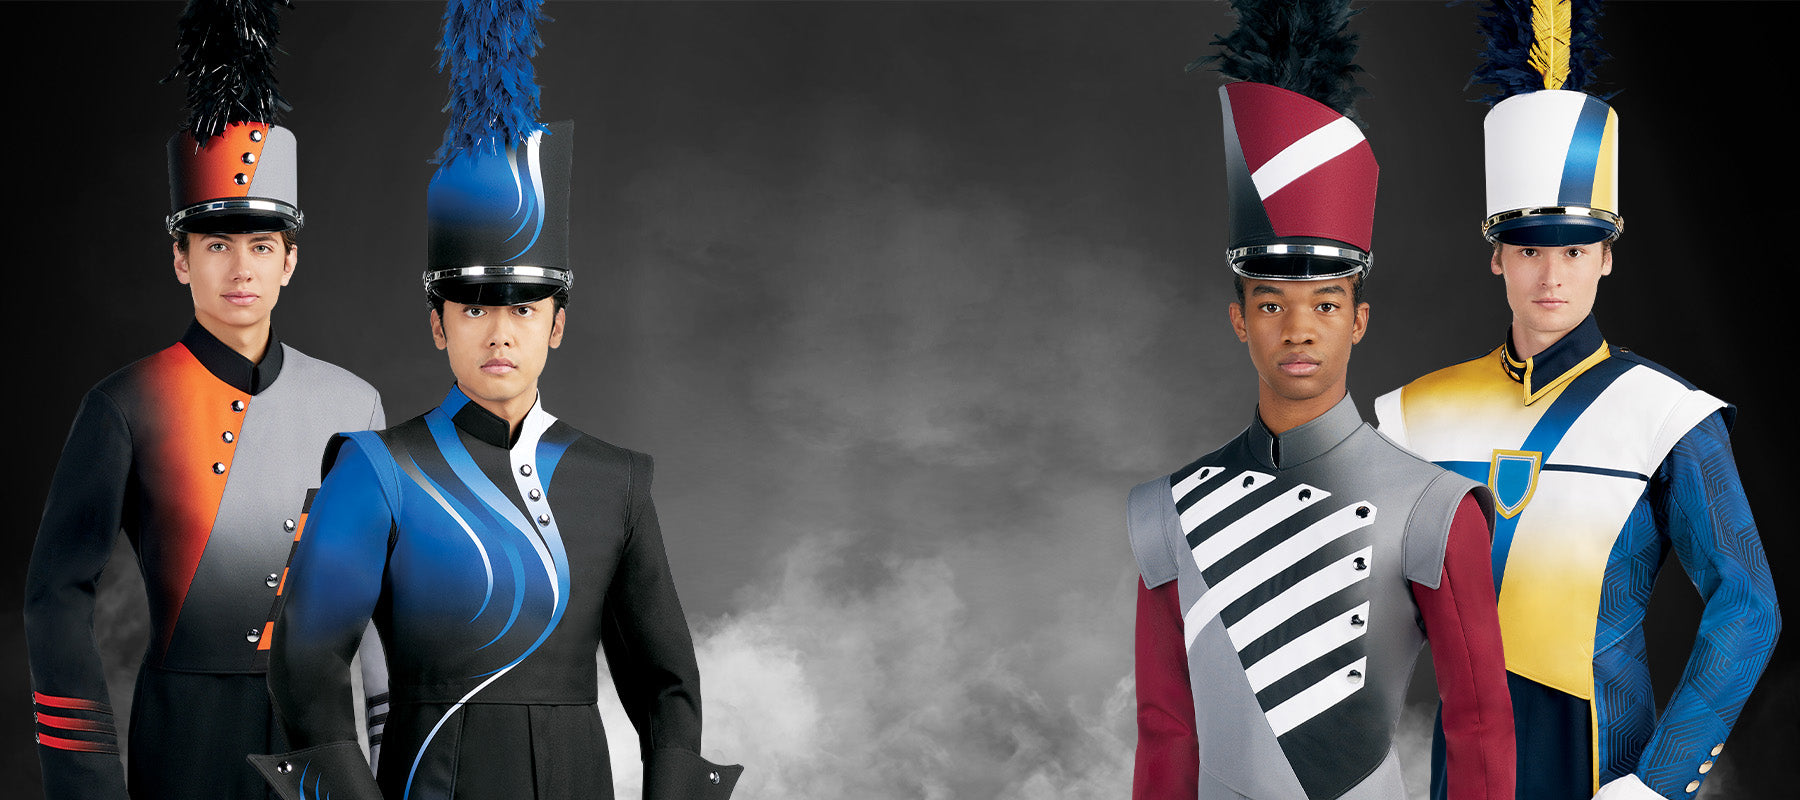 Marching Band Made-to-Order Uniforms